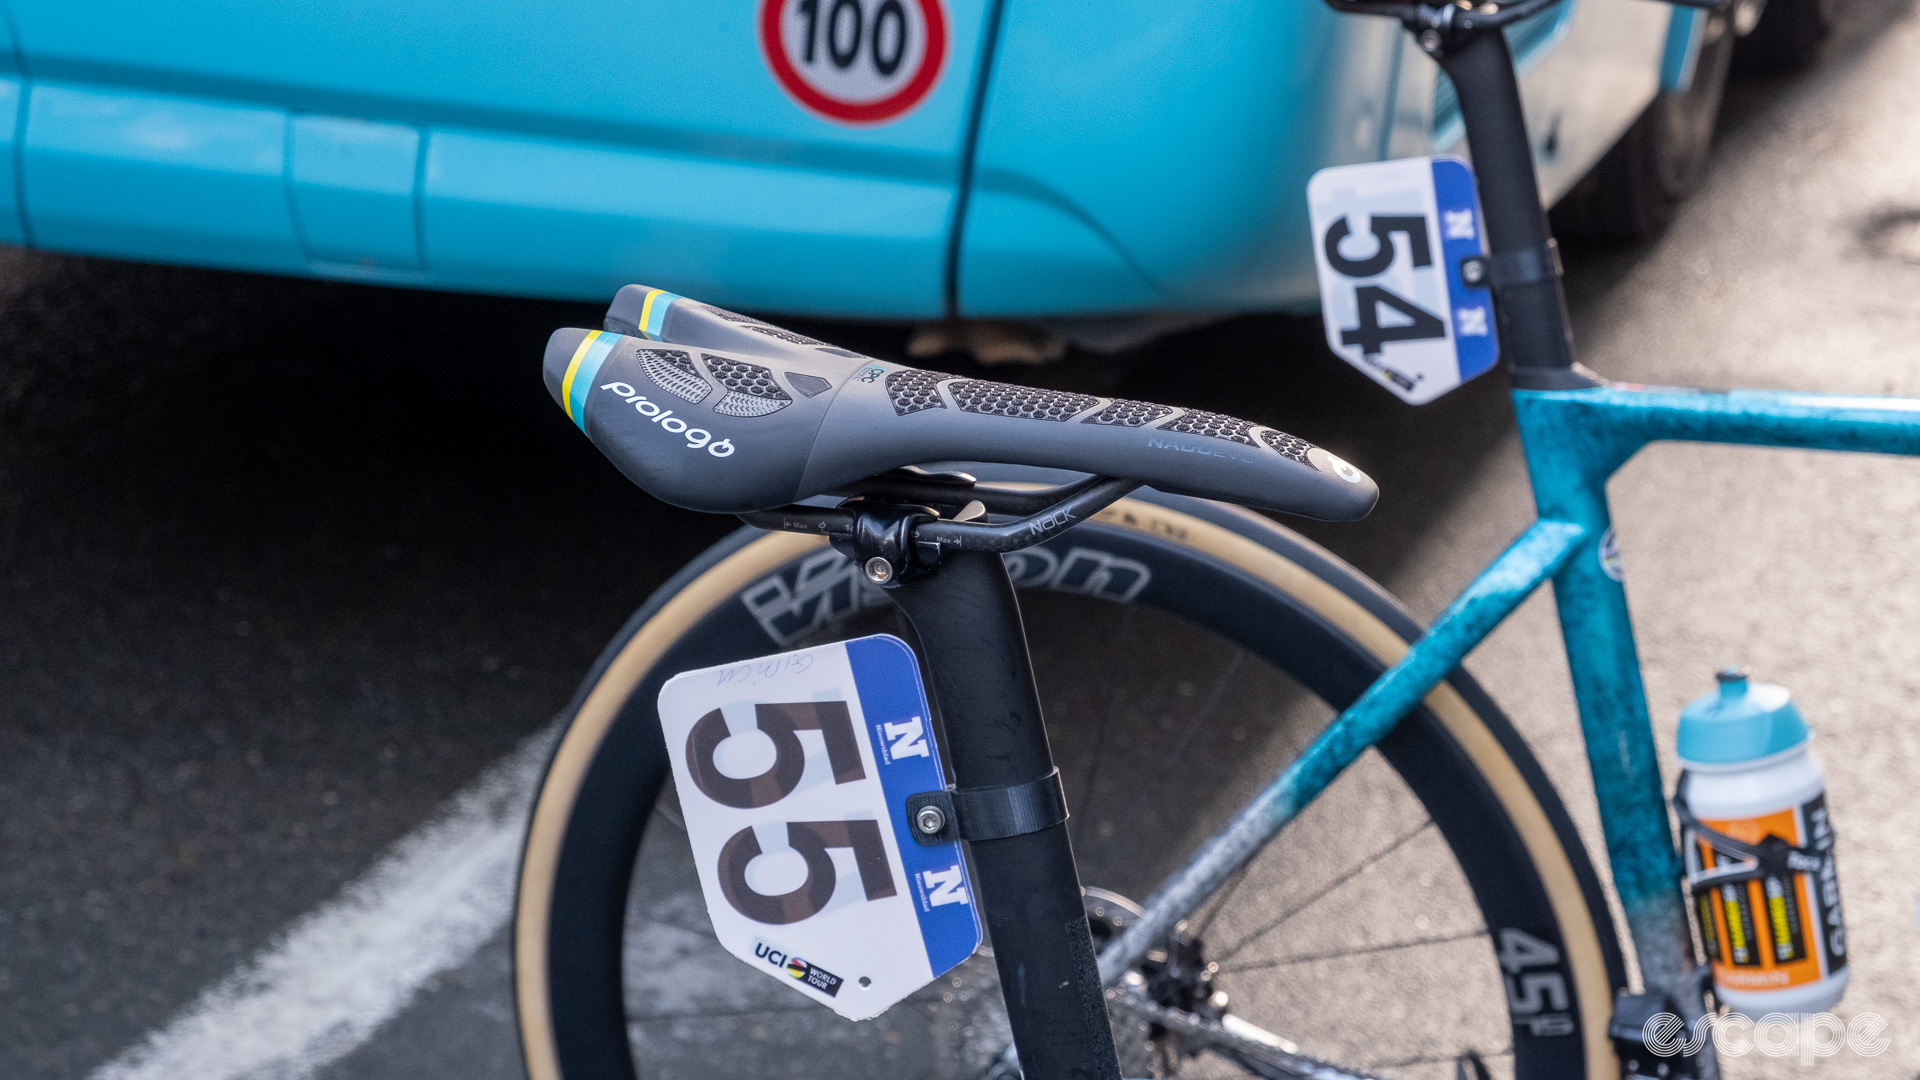 The image shows a Prologo saddle with the seat post mounted on the middle of the rails.